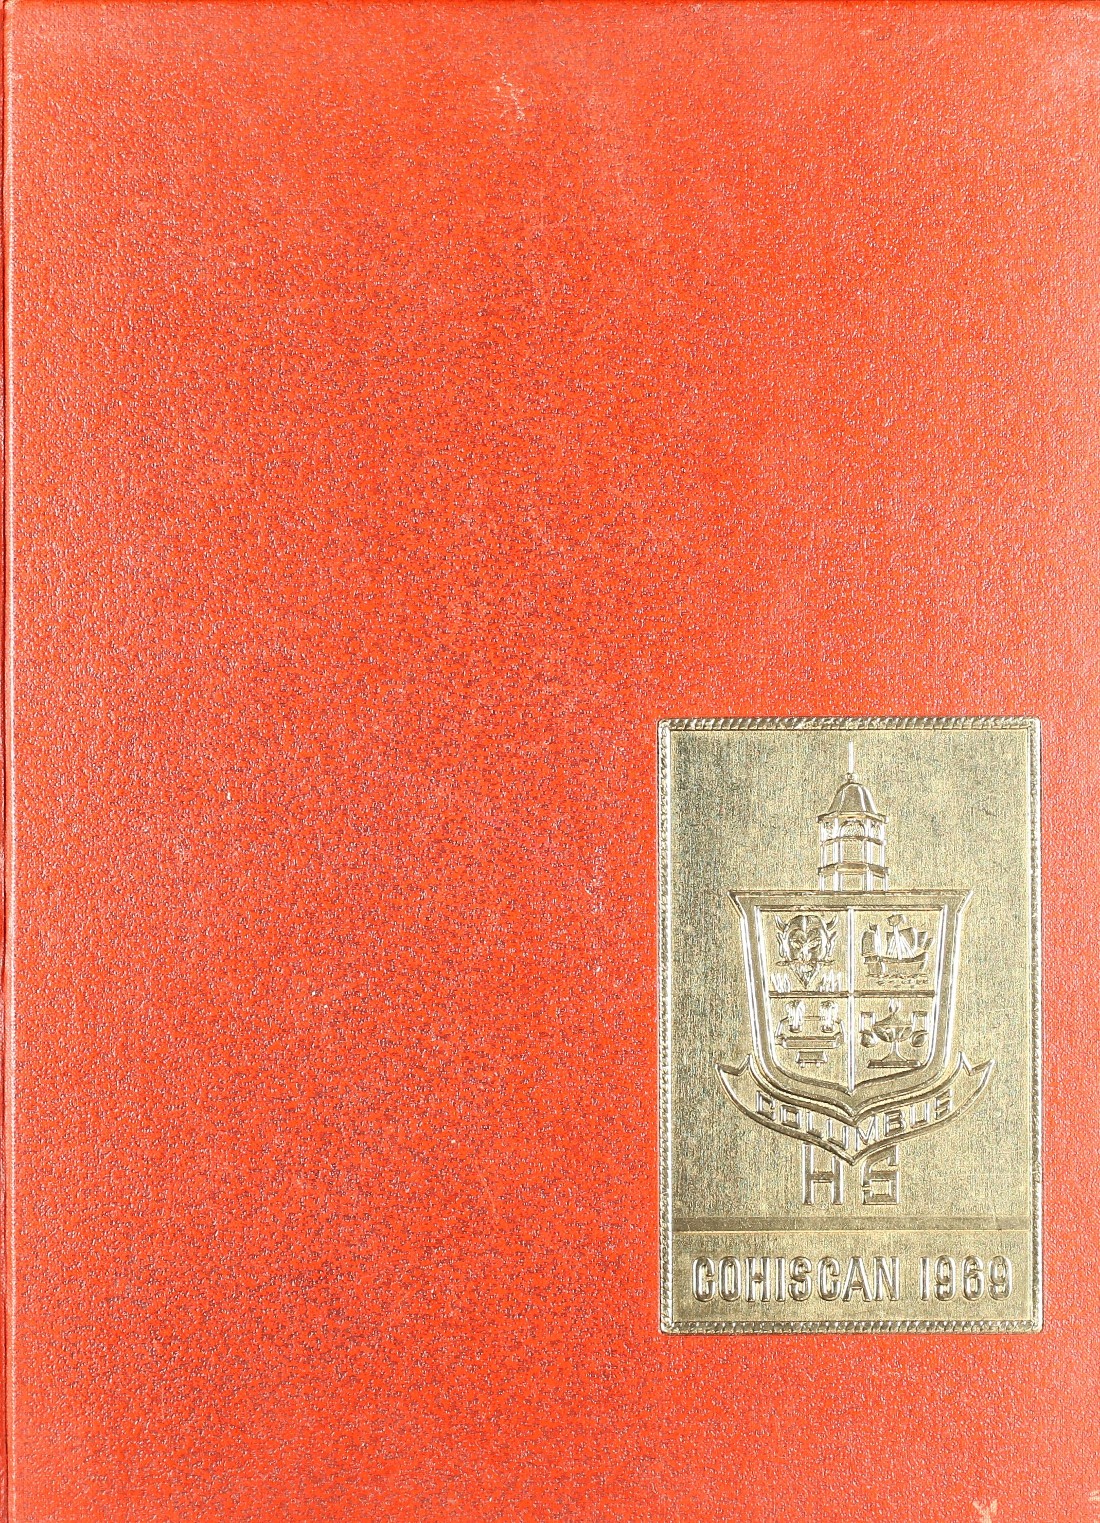 1969 yearbook from Columbus High School from Columbus, for sale